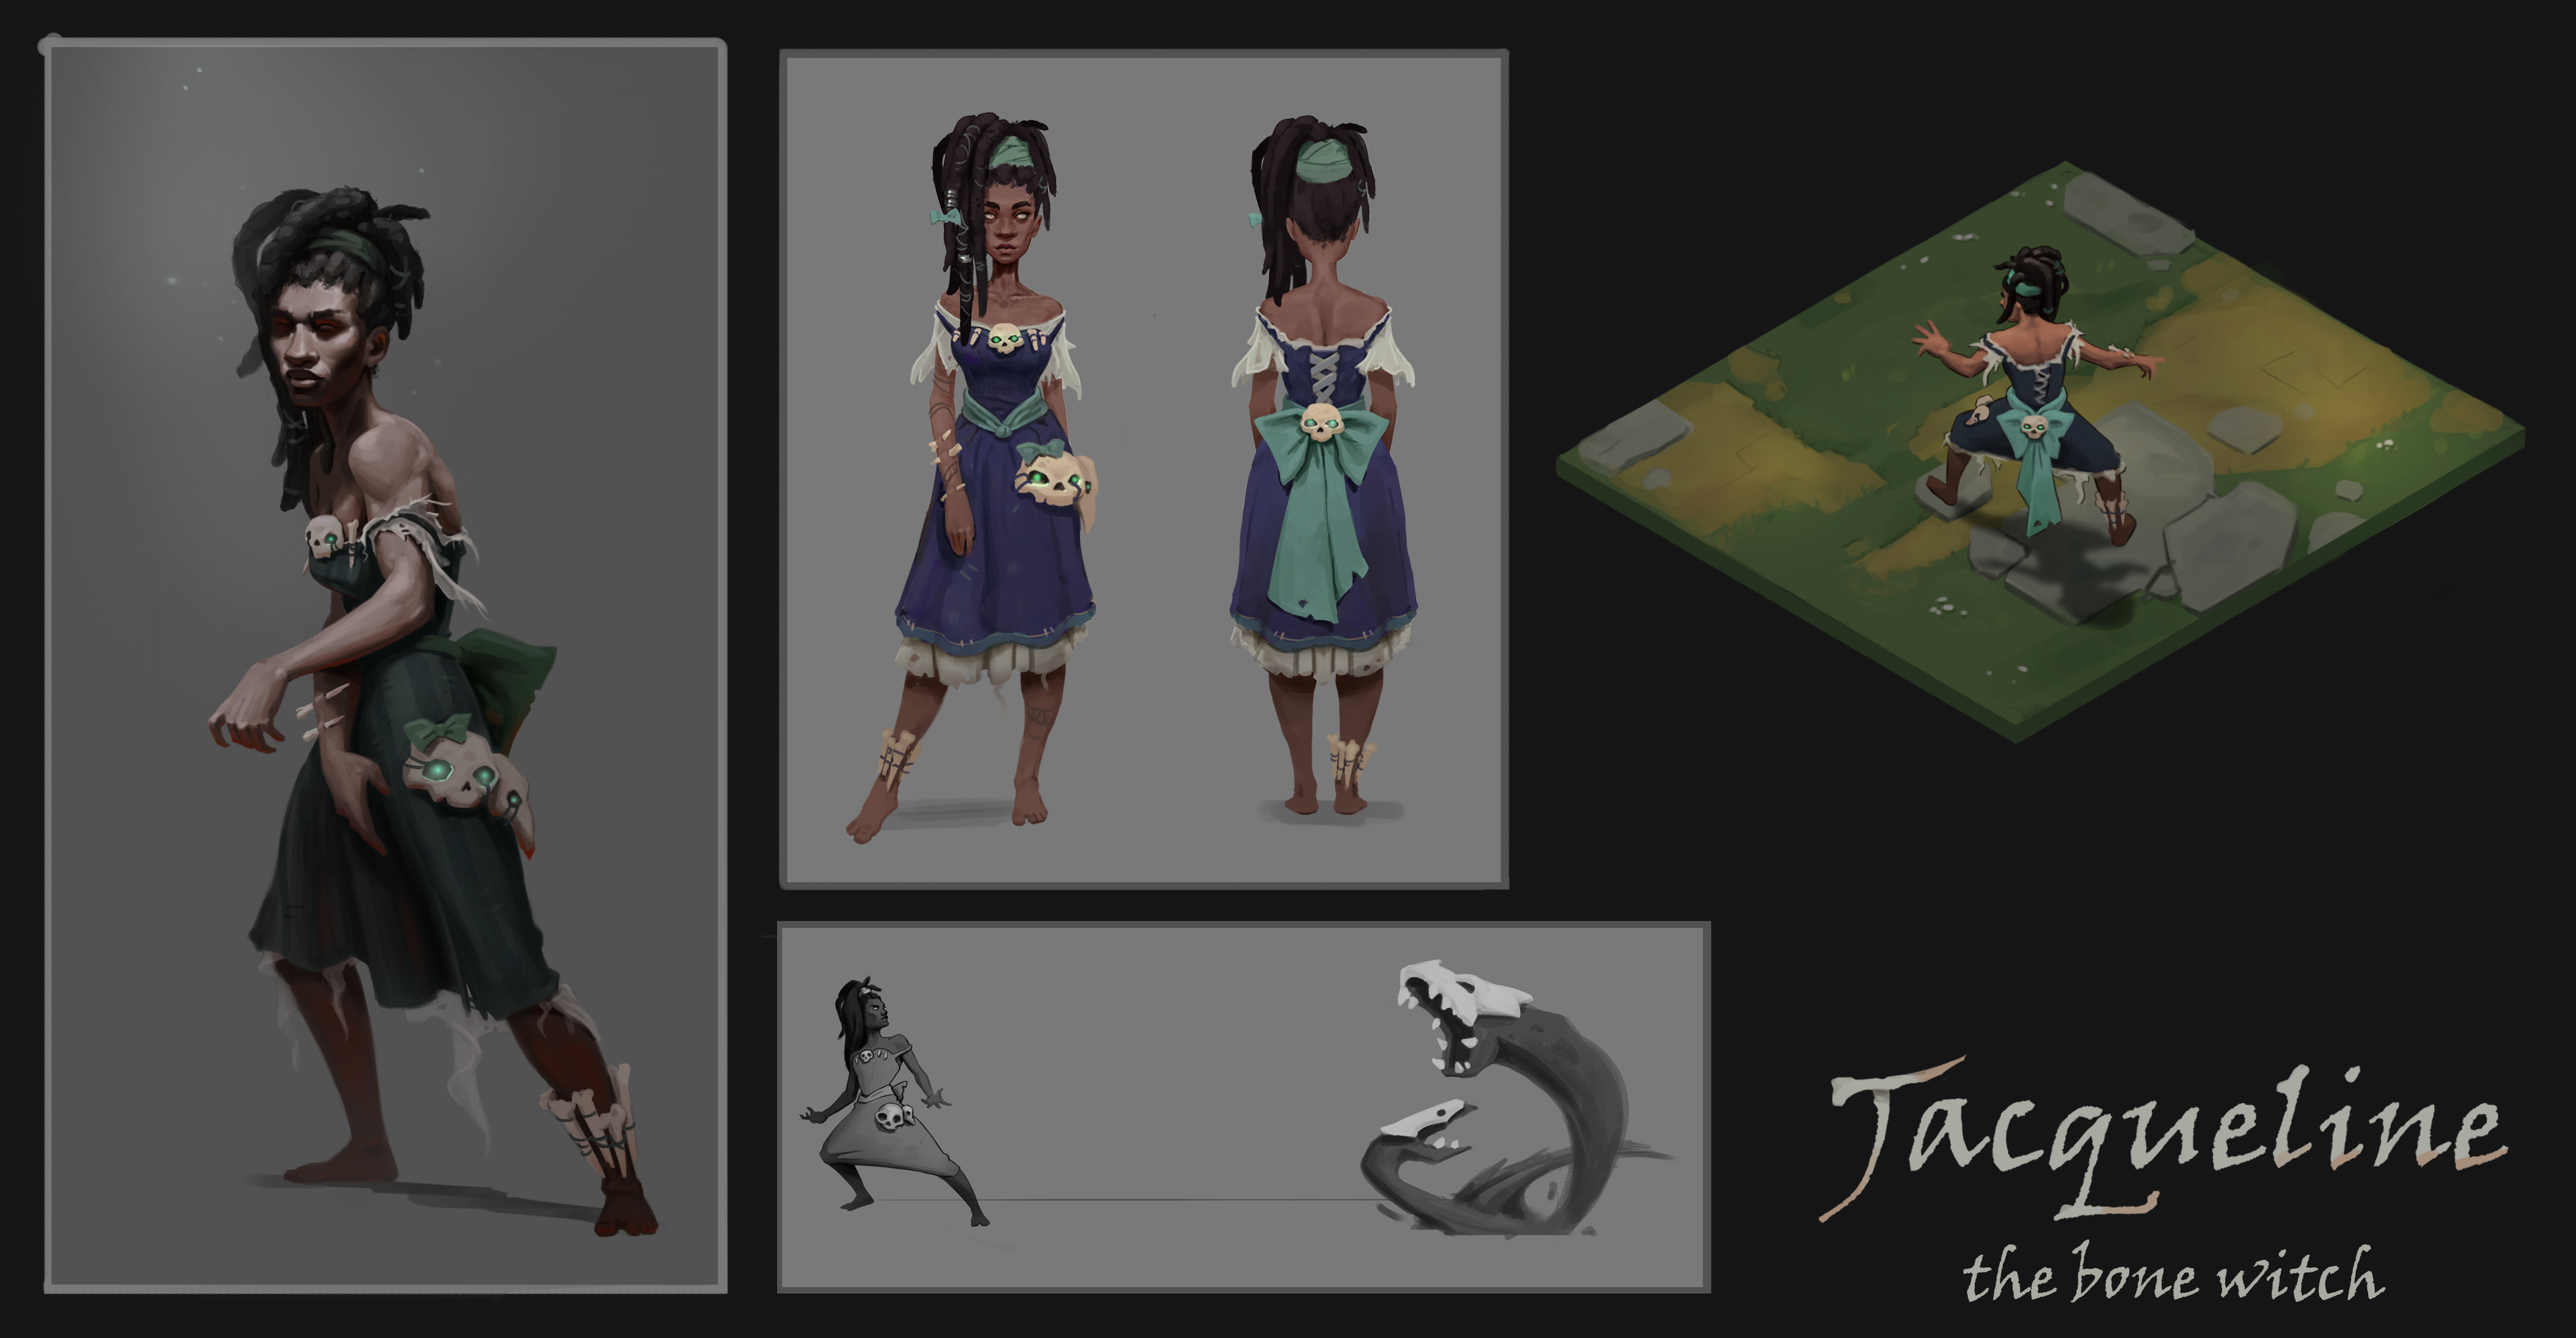 Final design, mood painting and an in game concept painting.